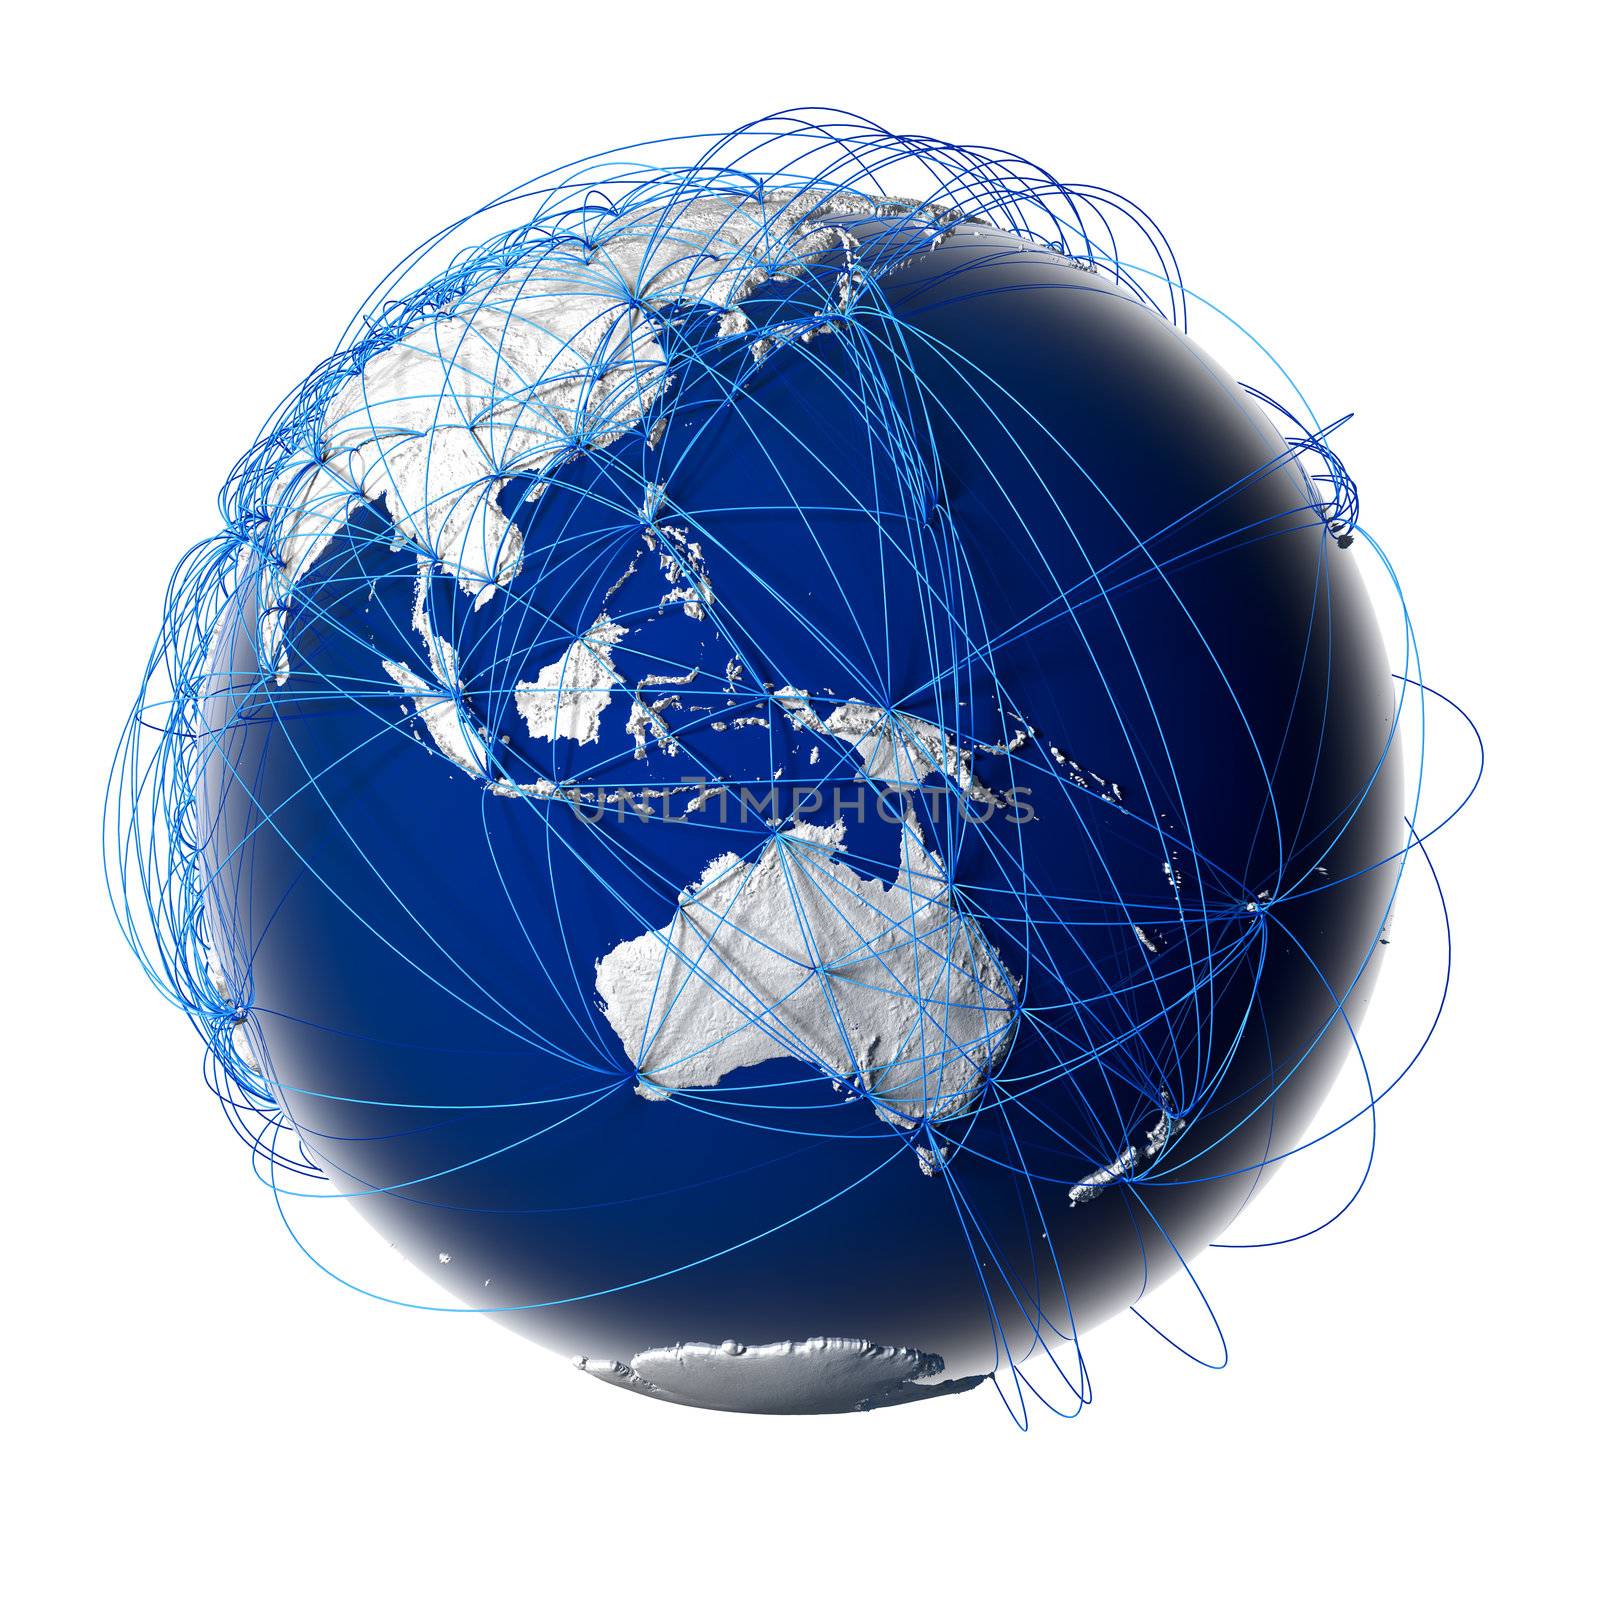 Earth with relief stylized continents surrounded by a wired network, symbolizing the world aviation traffic, which is based on real data on the carriage of passengers and flight directions. Isolated on white